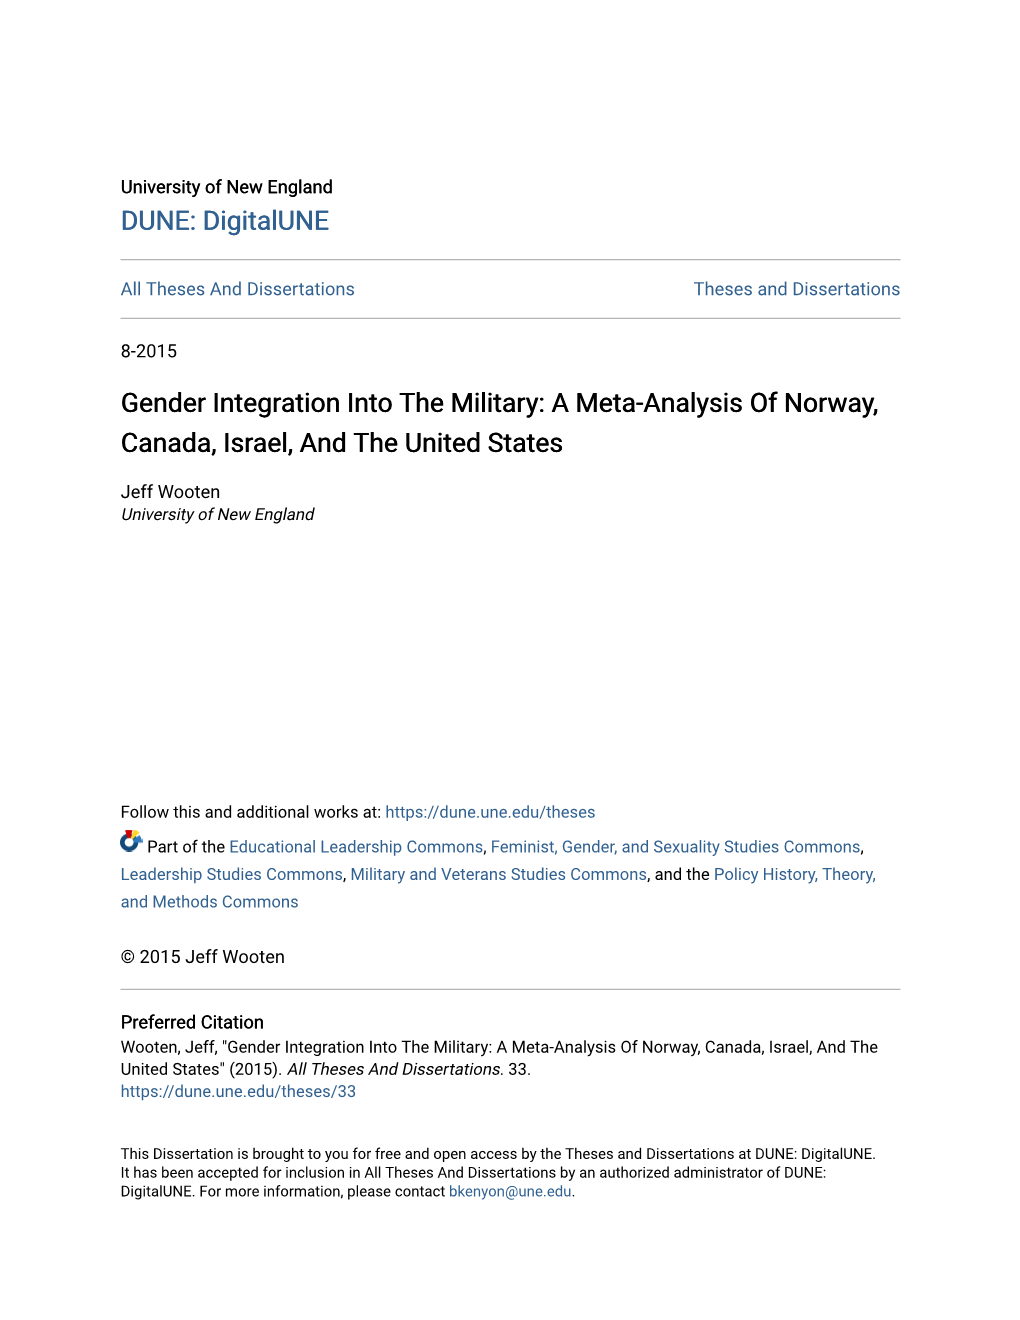 Gender Integration Into the Military: a Meta-Analysis of Norway, Canada, Israel, and the United States